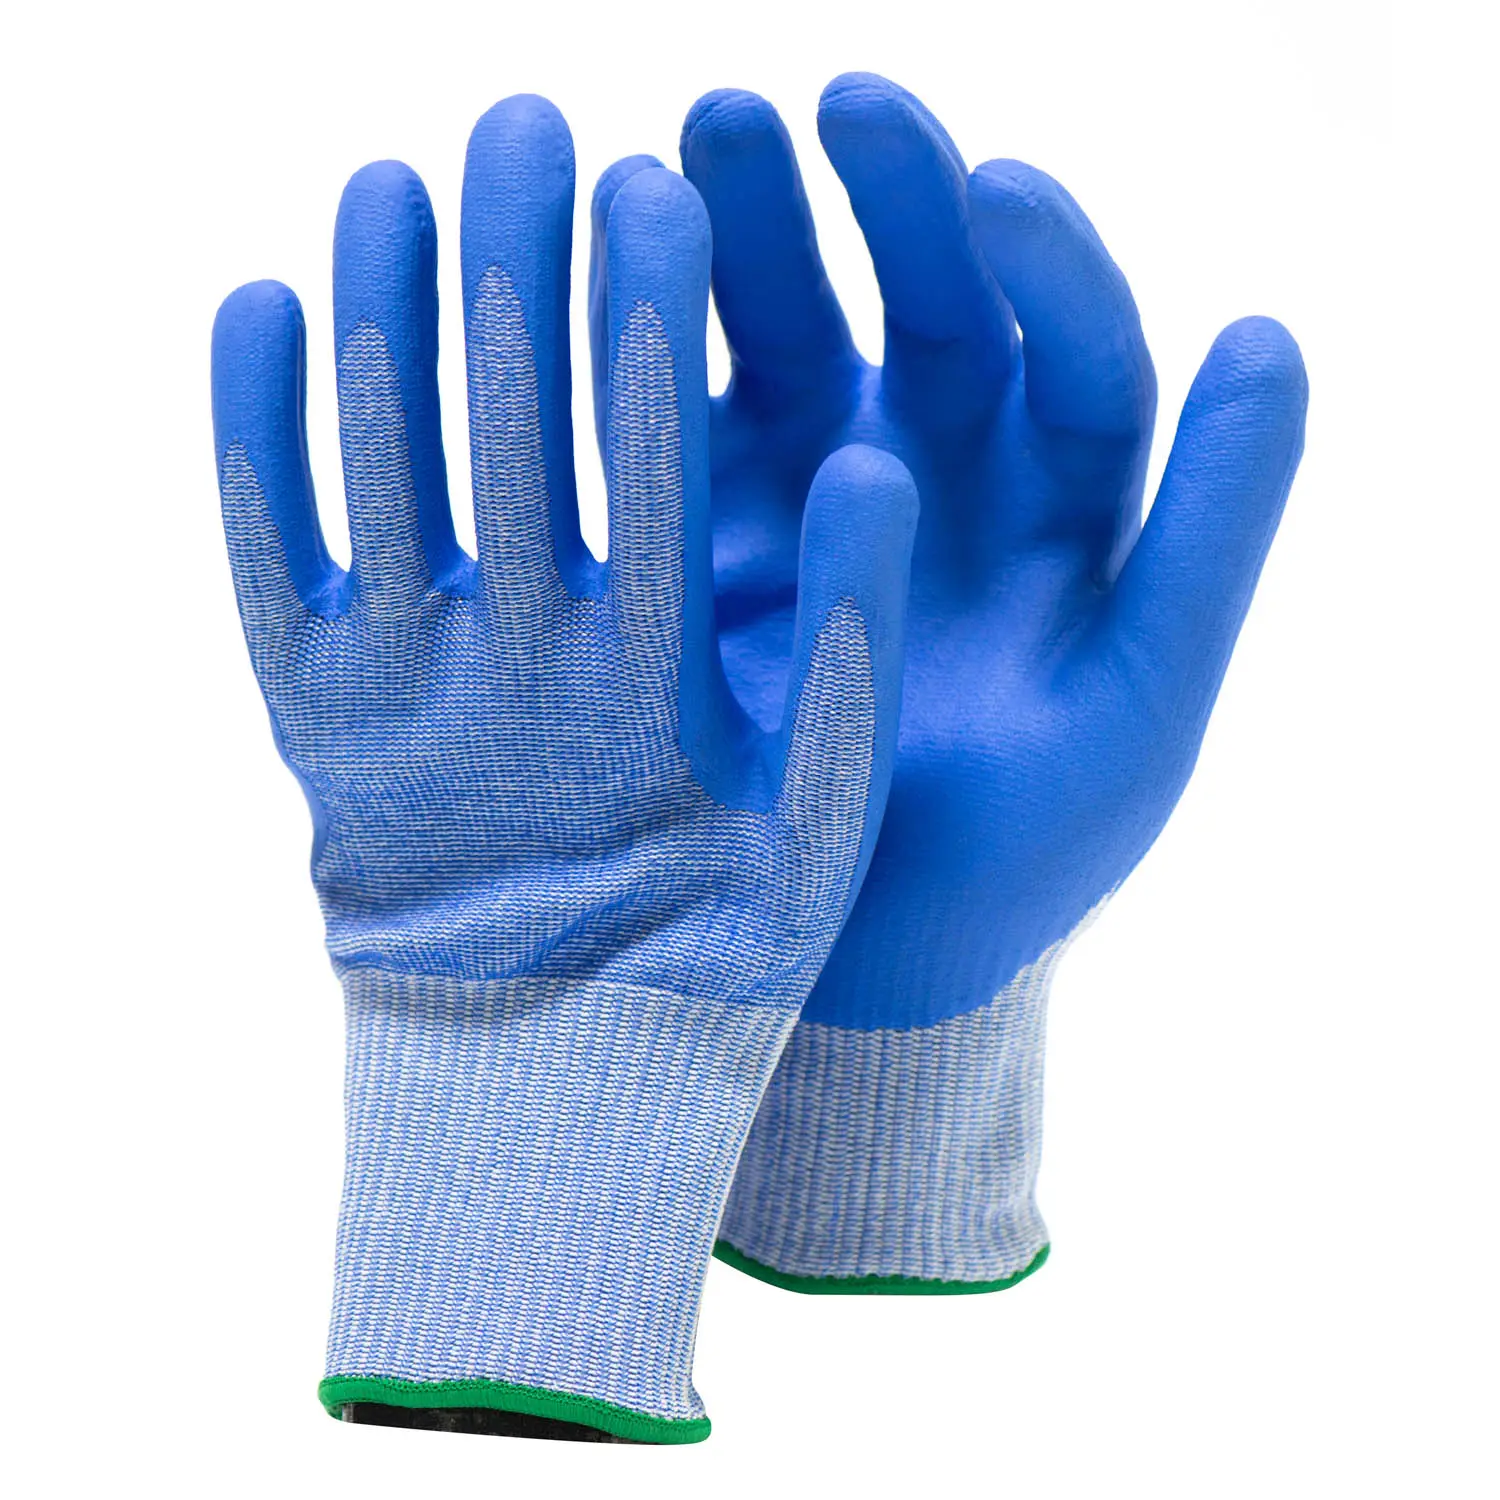 U2 Knitted Anti Cut Hand Protect Safety Gloves Level 5